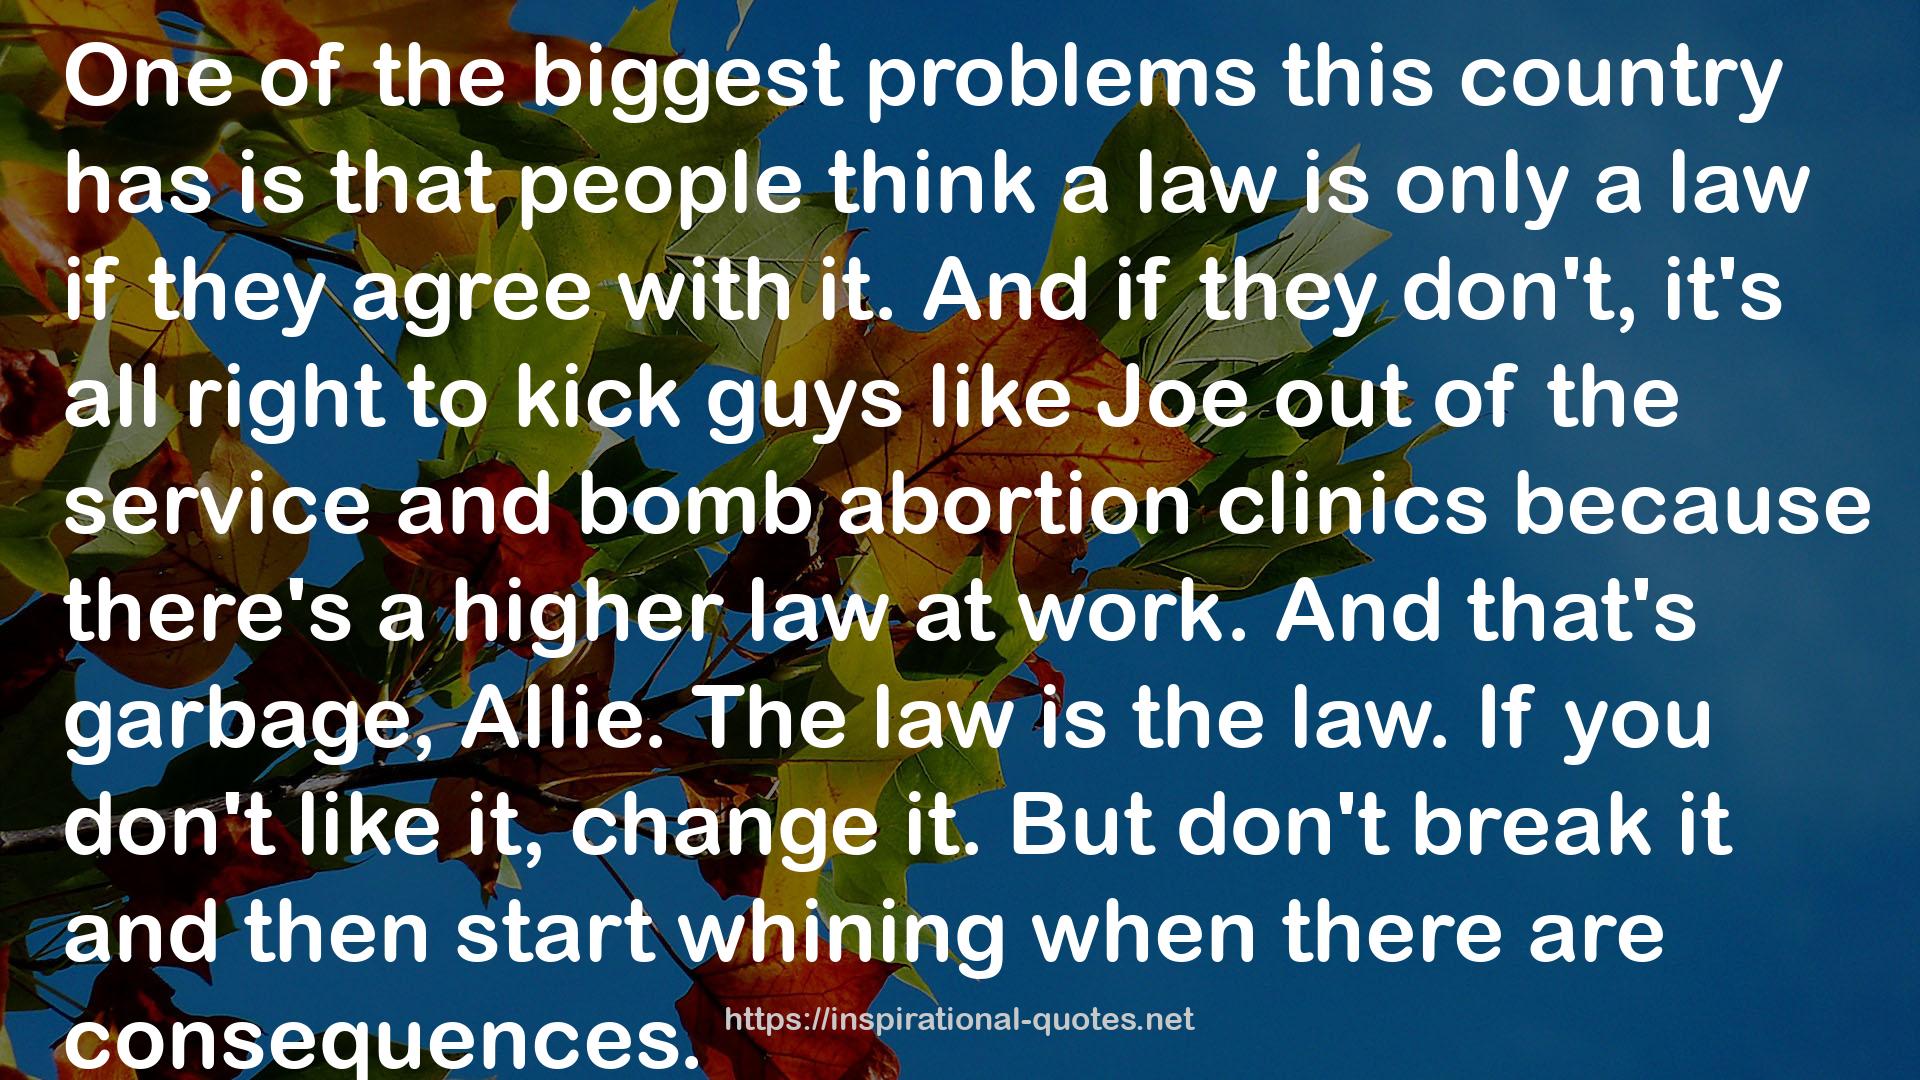 the service and bomb abortion clinics  QUOTES